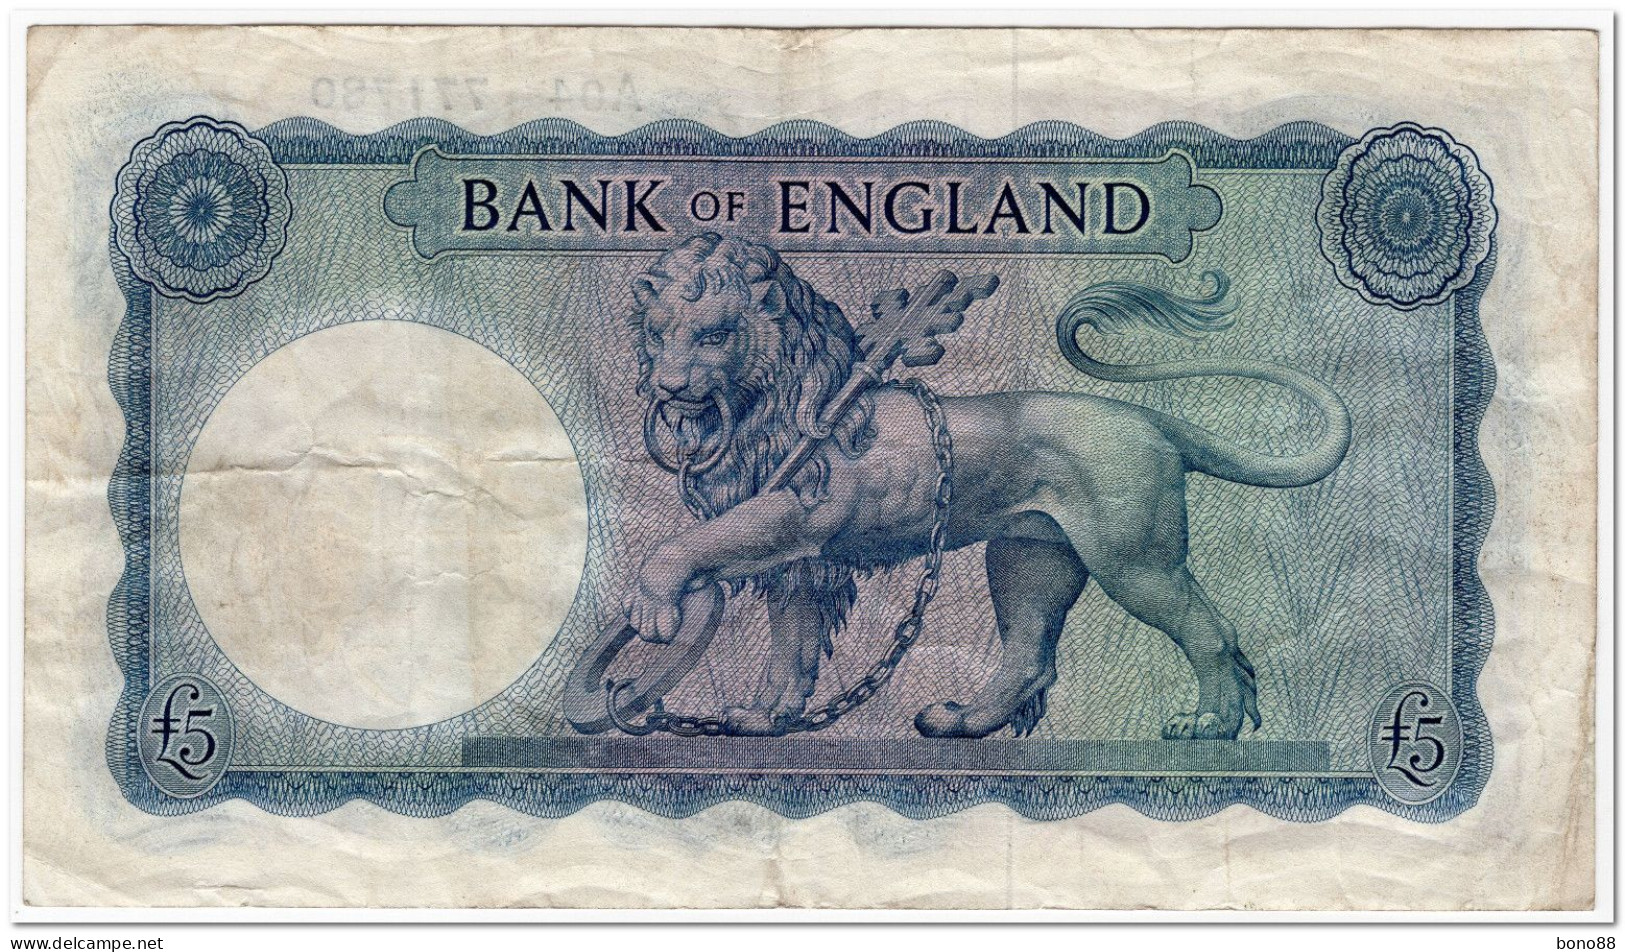 GREAT BRITAIN,BANK OF ENGLAND,5 POUNDS,1957-67,P.371,F+ - 5 Pounds